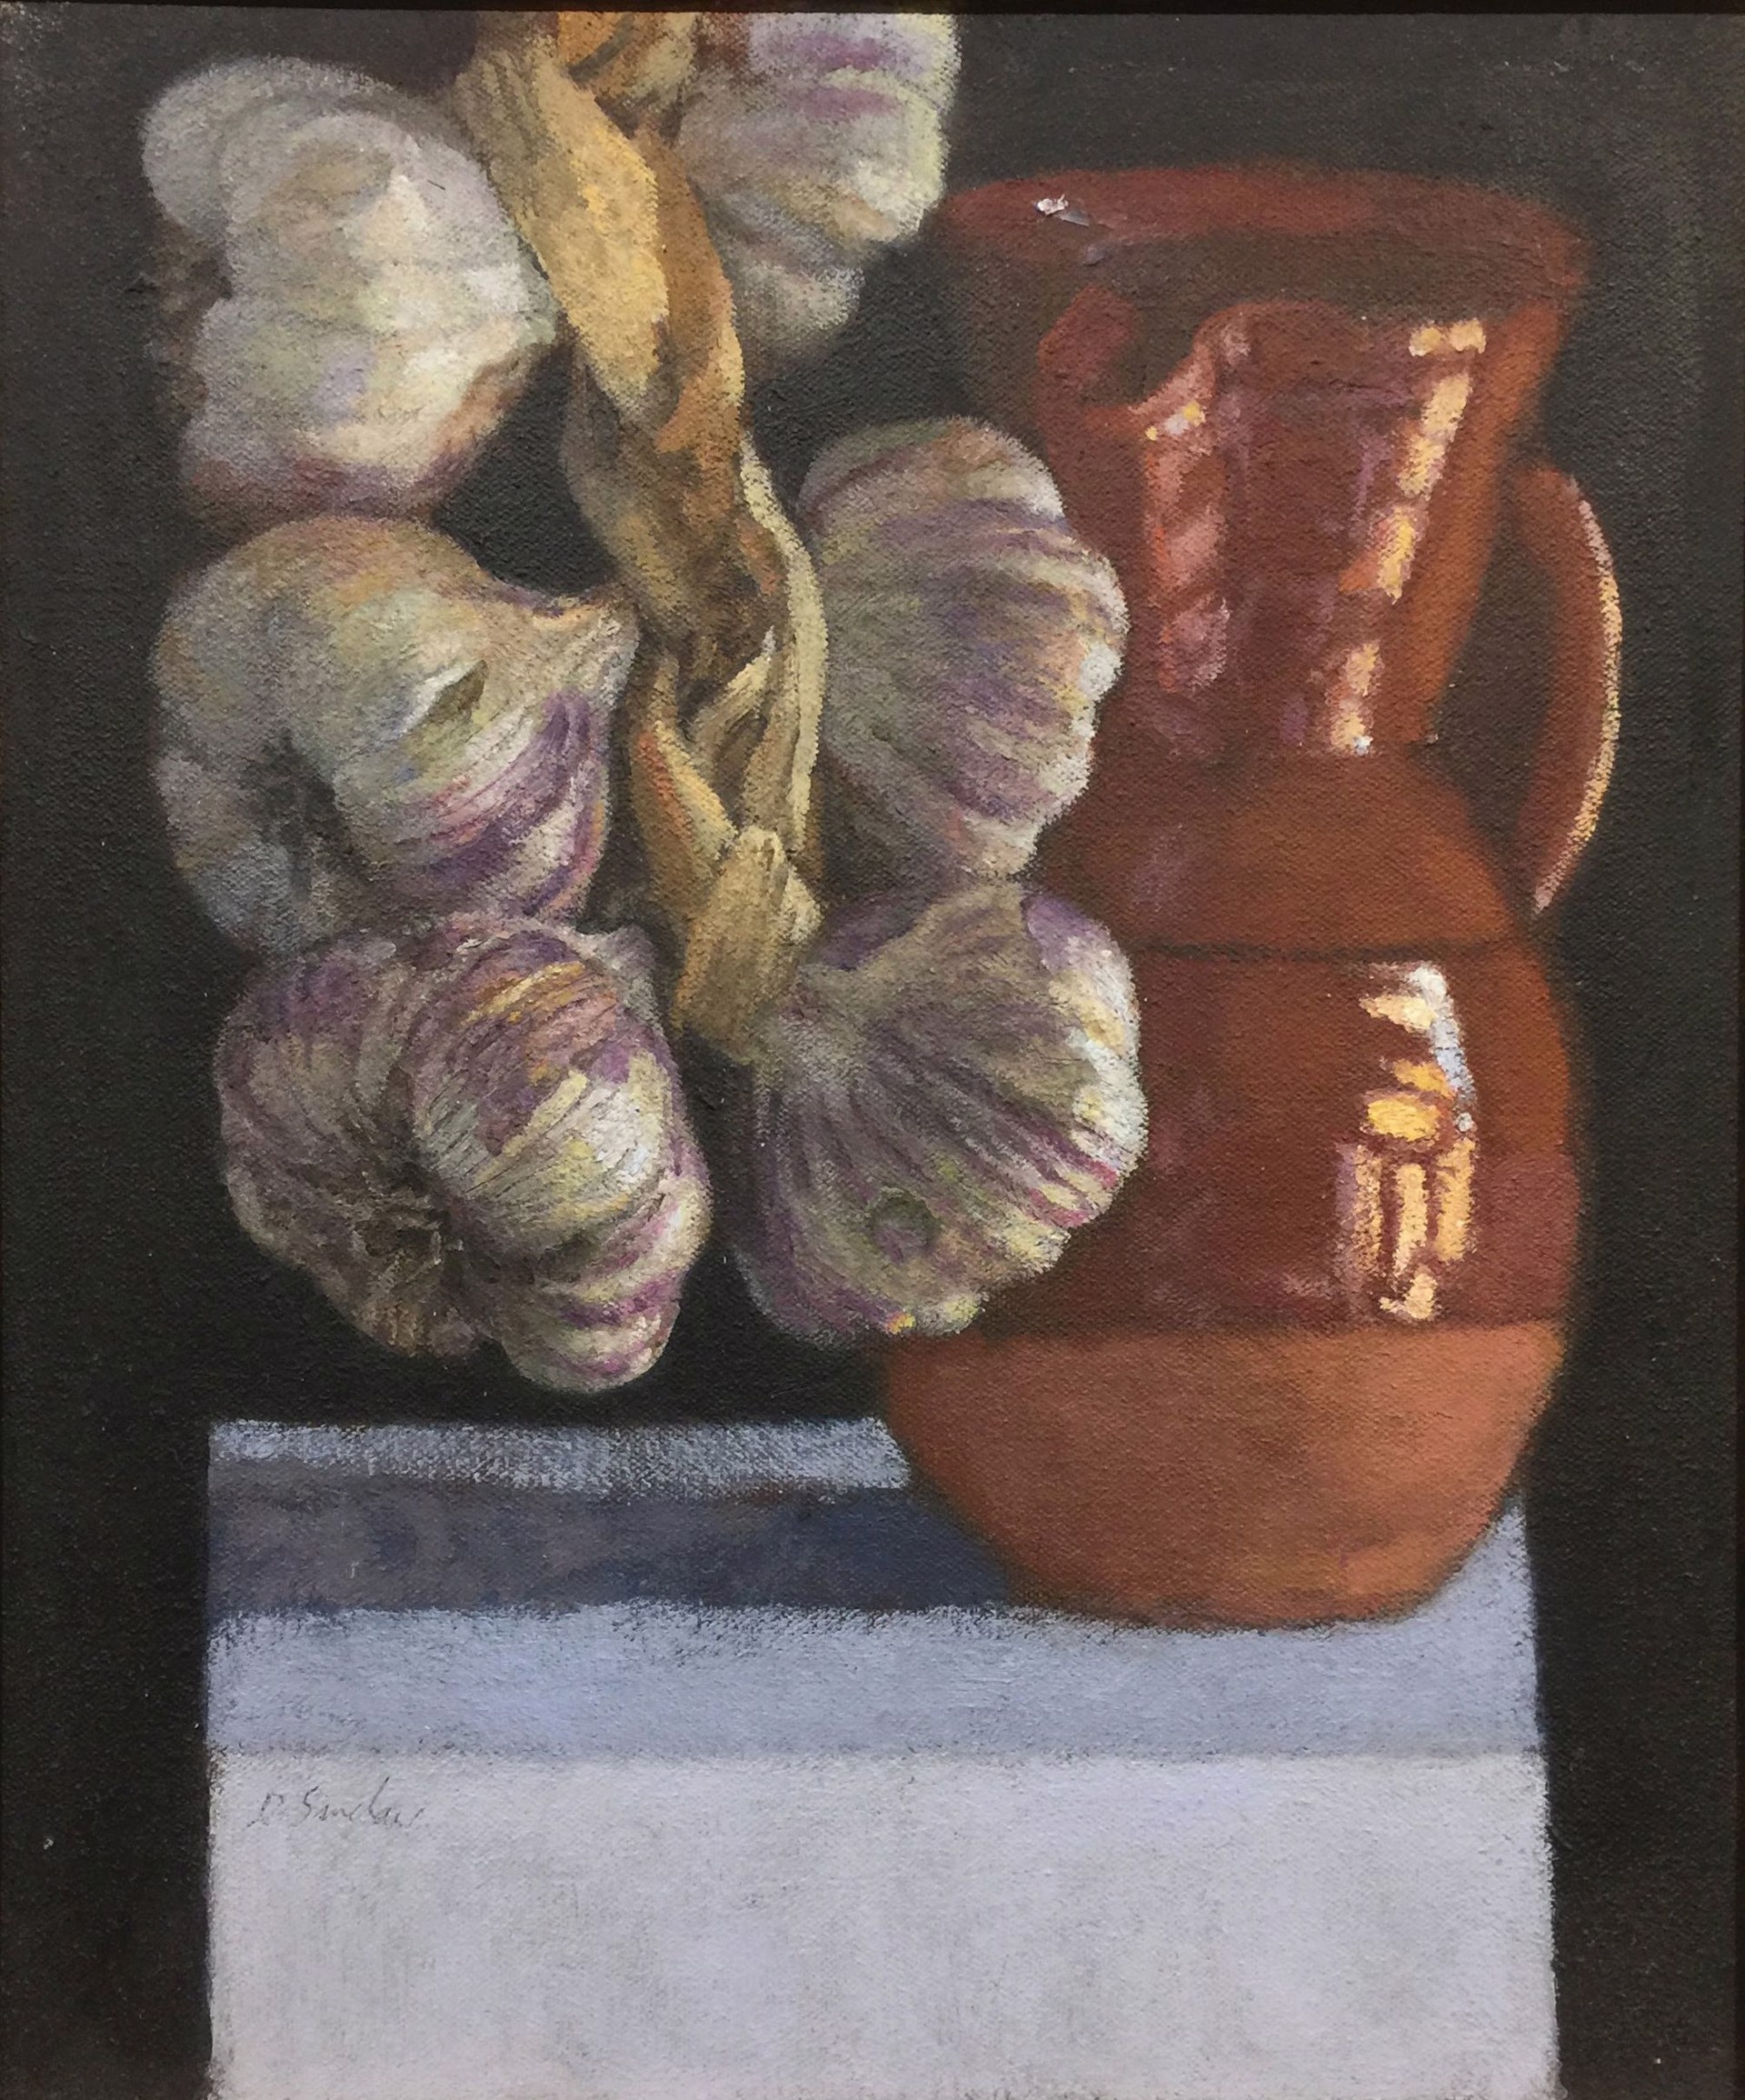 Garlic and Pitcher by David Sinclair